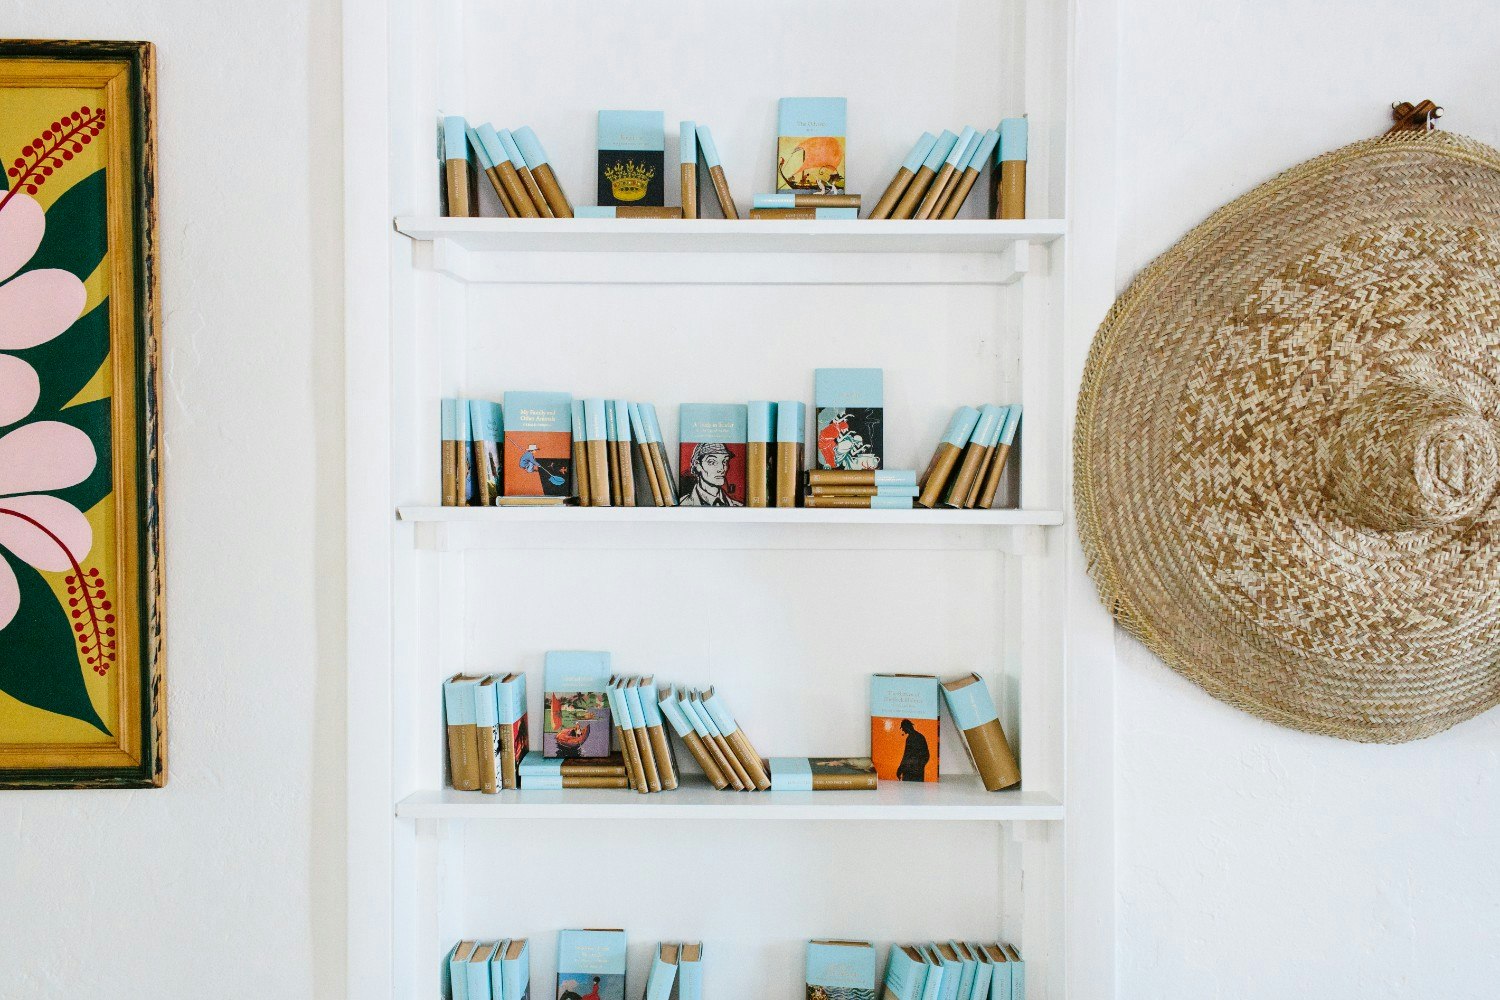 Books and a hat in an apartment in The Bahamas